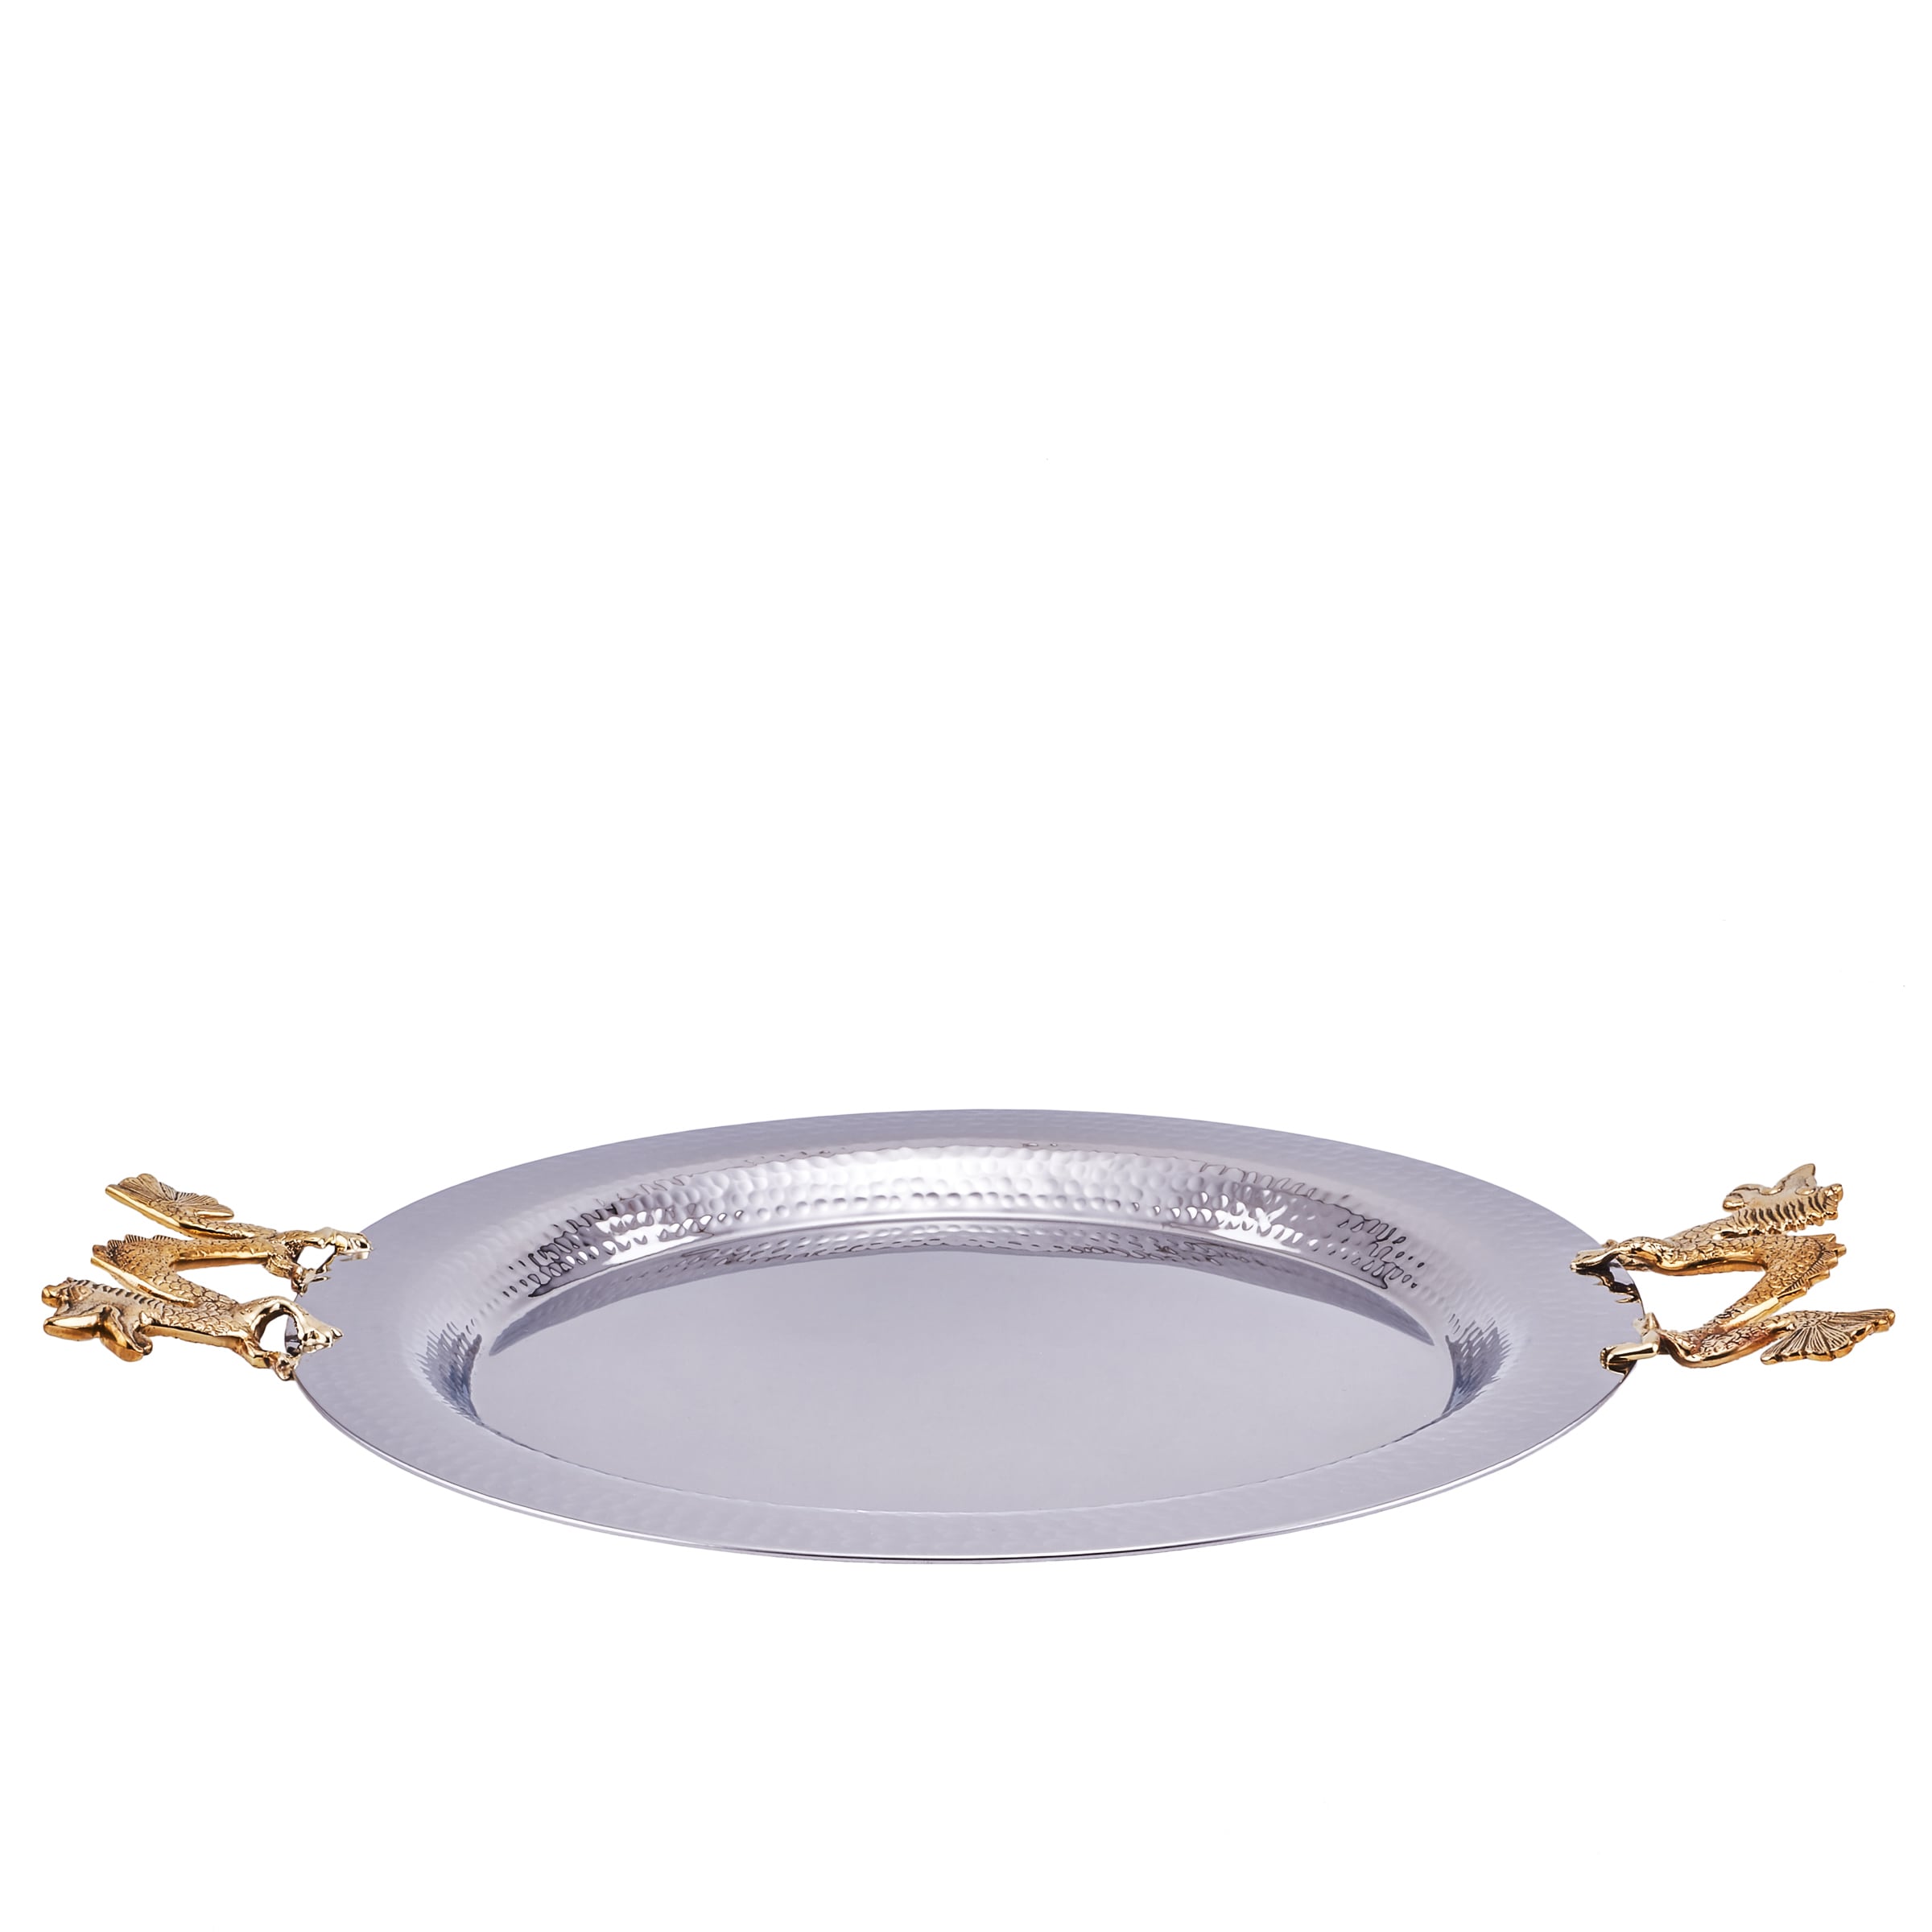 Shop Silver Stainless Steel Round Hammered Tray With Dragon Handles